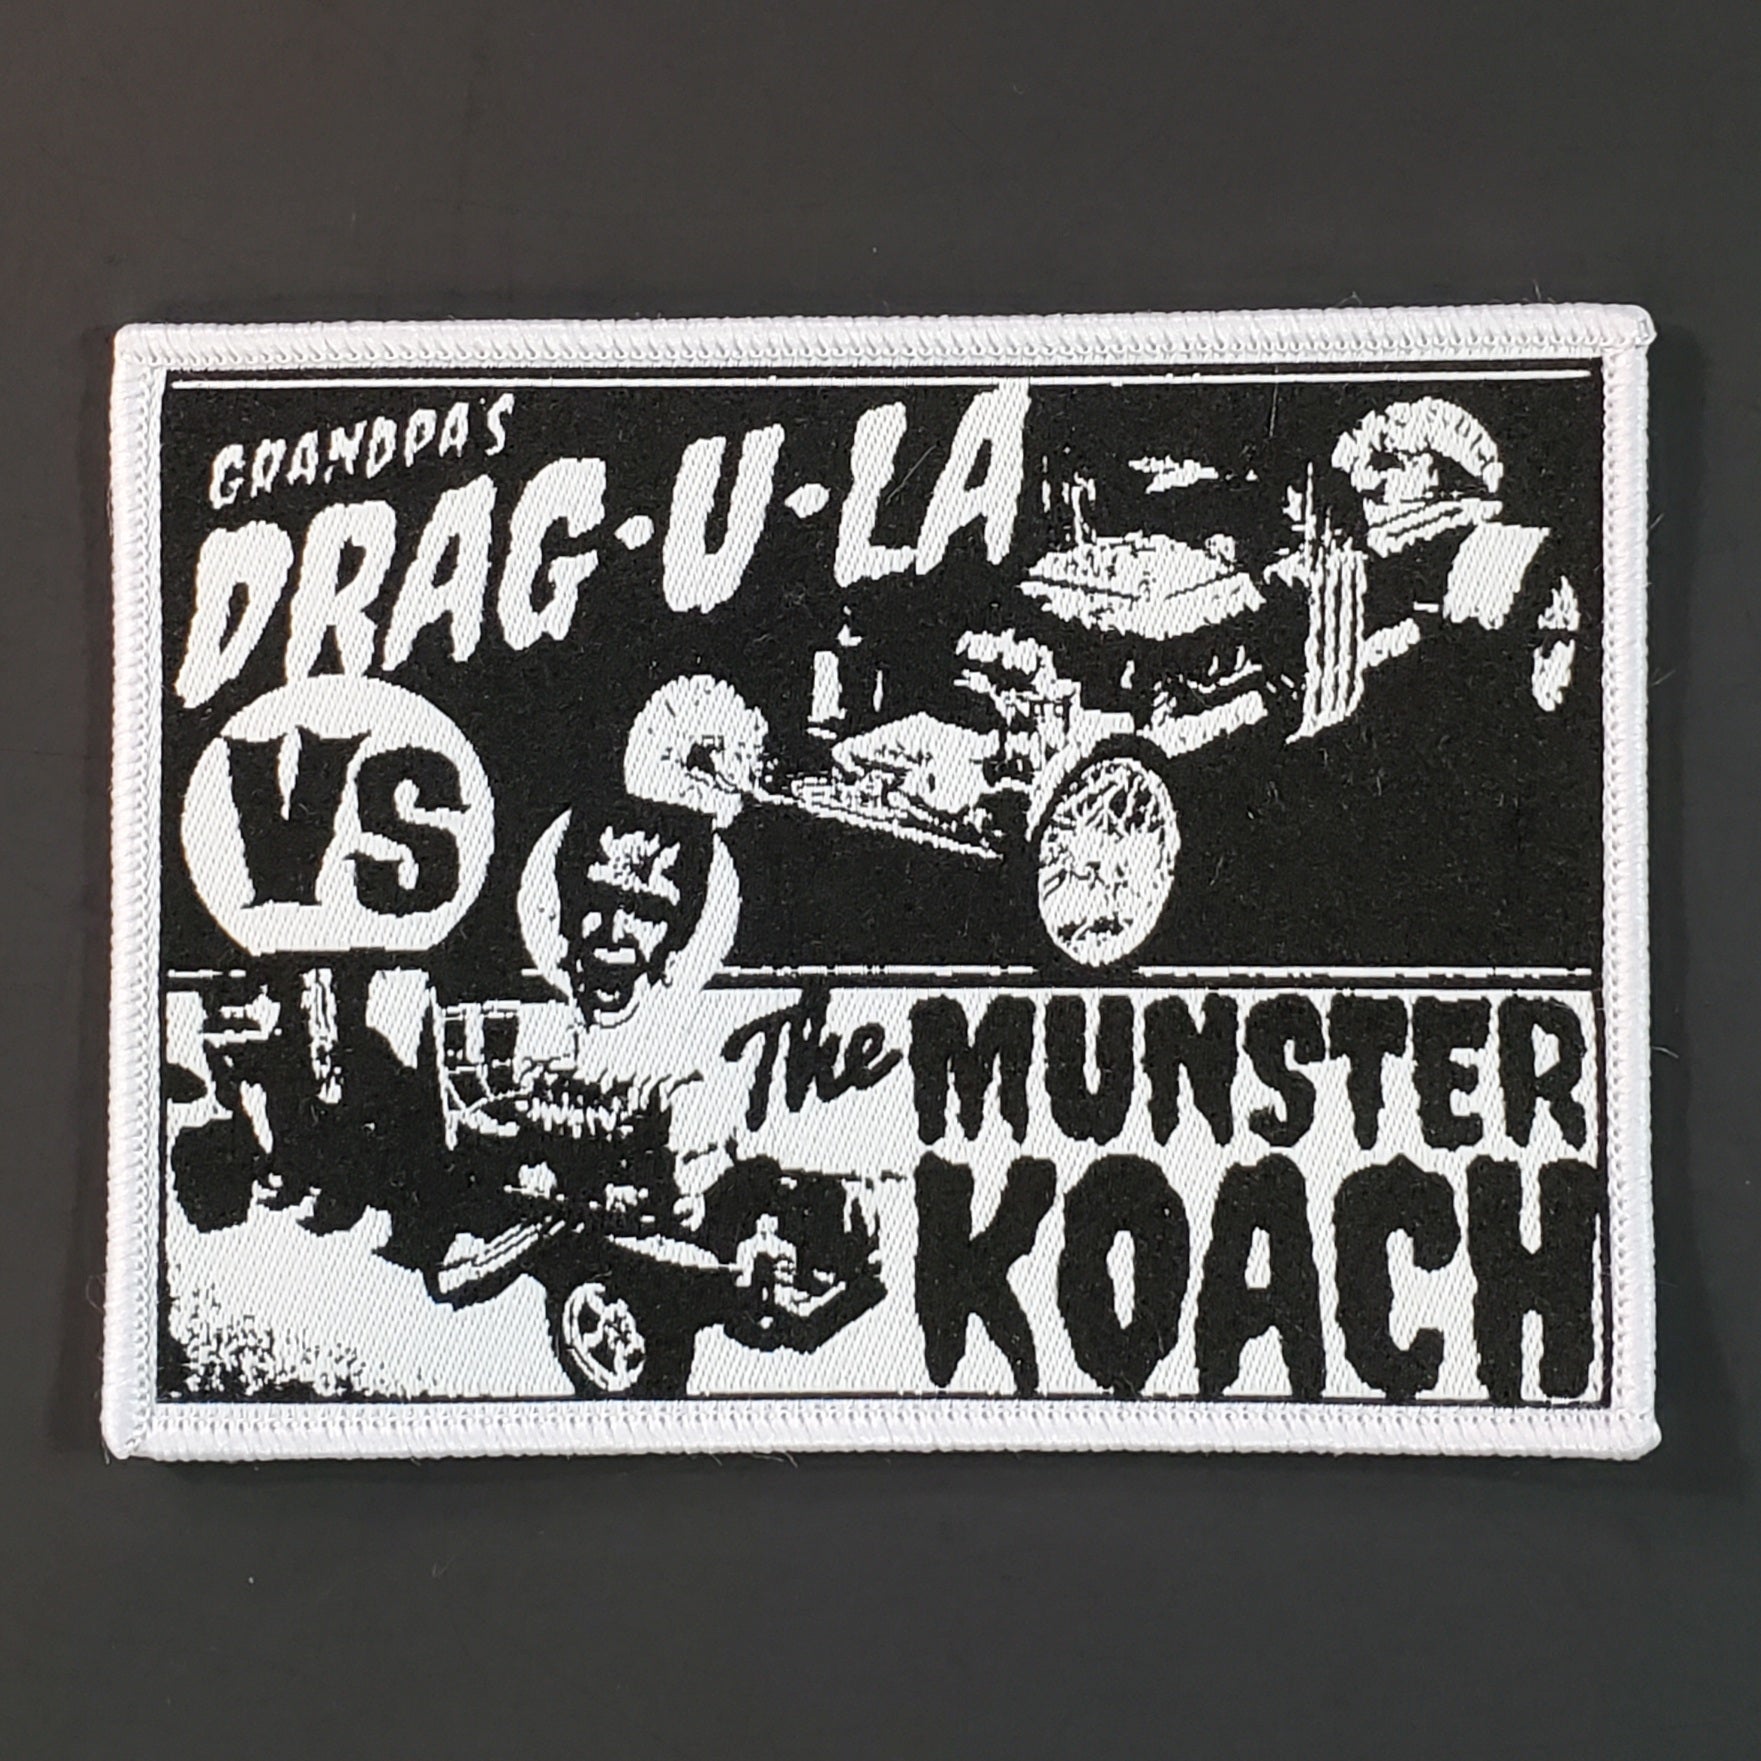 Black and white woven rectangular patch with embroidered white border featuring dragula and Munster Koach